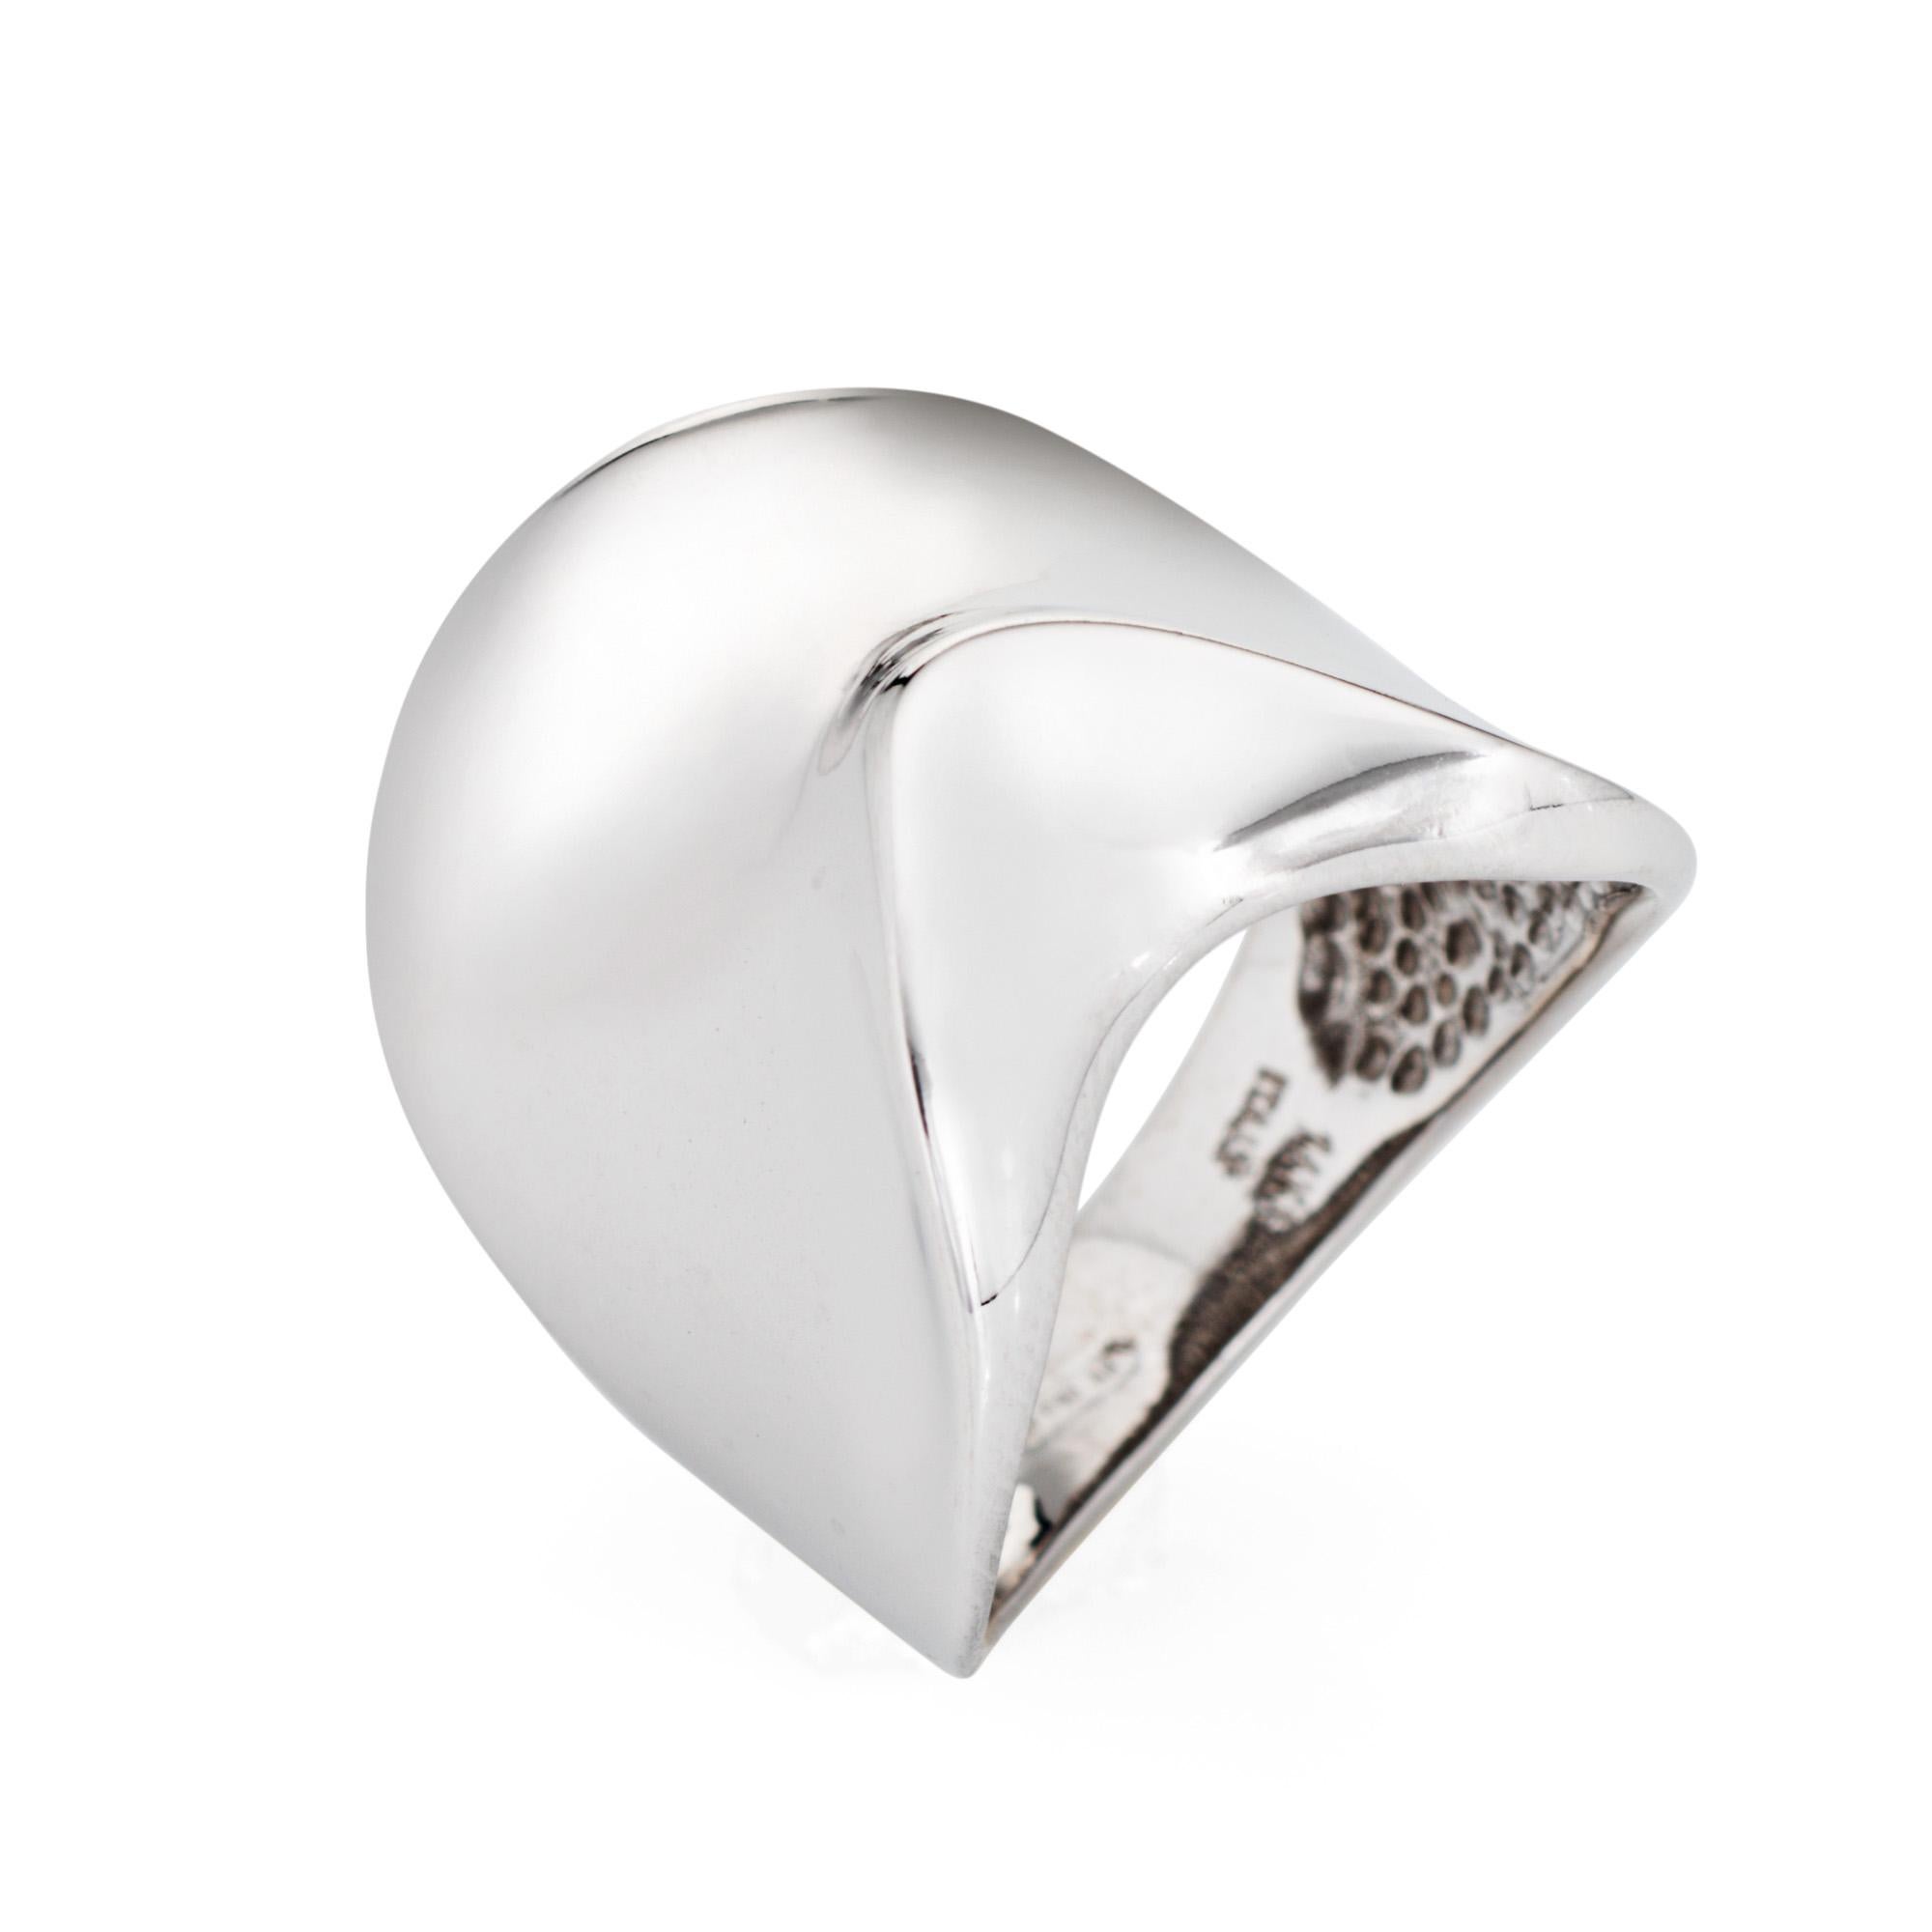 Stylish vintage sculptural ring (circa 1990s) crafted in 14 karat white gold. 

The distinct & stylish ring features a sculpted undulating design that makes a bold statement on the hand. The low rise ring (5mm - 0.19 inches) sits comfortably on the